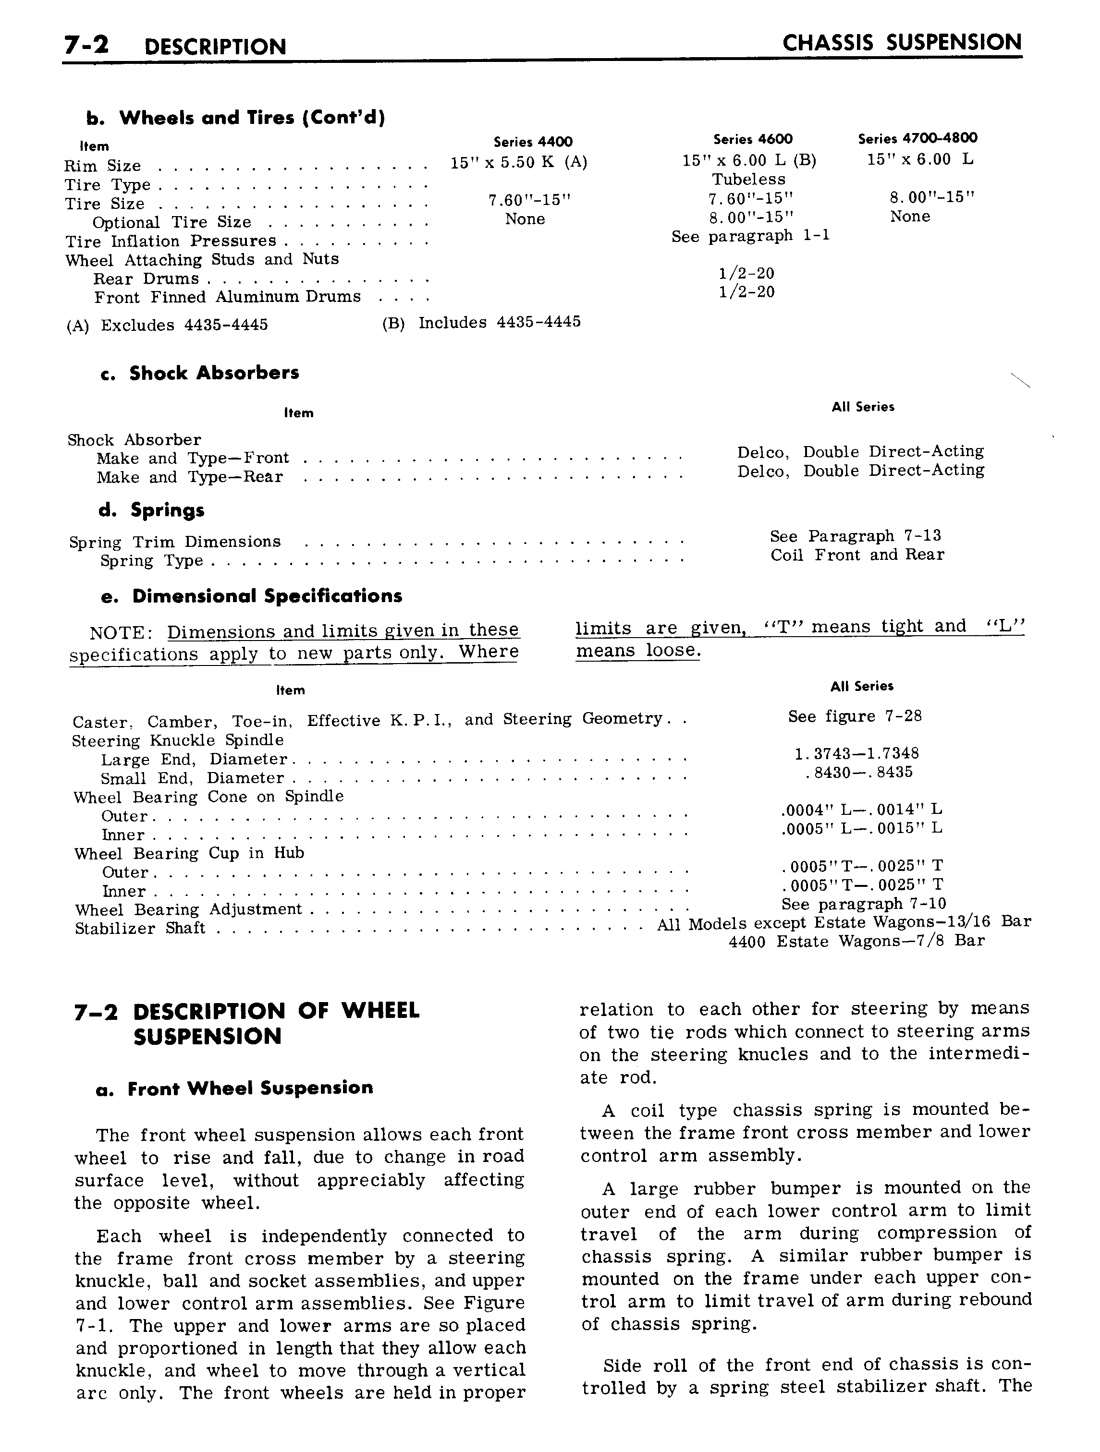 n_07 1961 Buick Shop Manual - Chassis Suspension-002-002.jpg